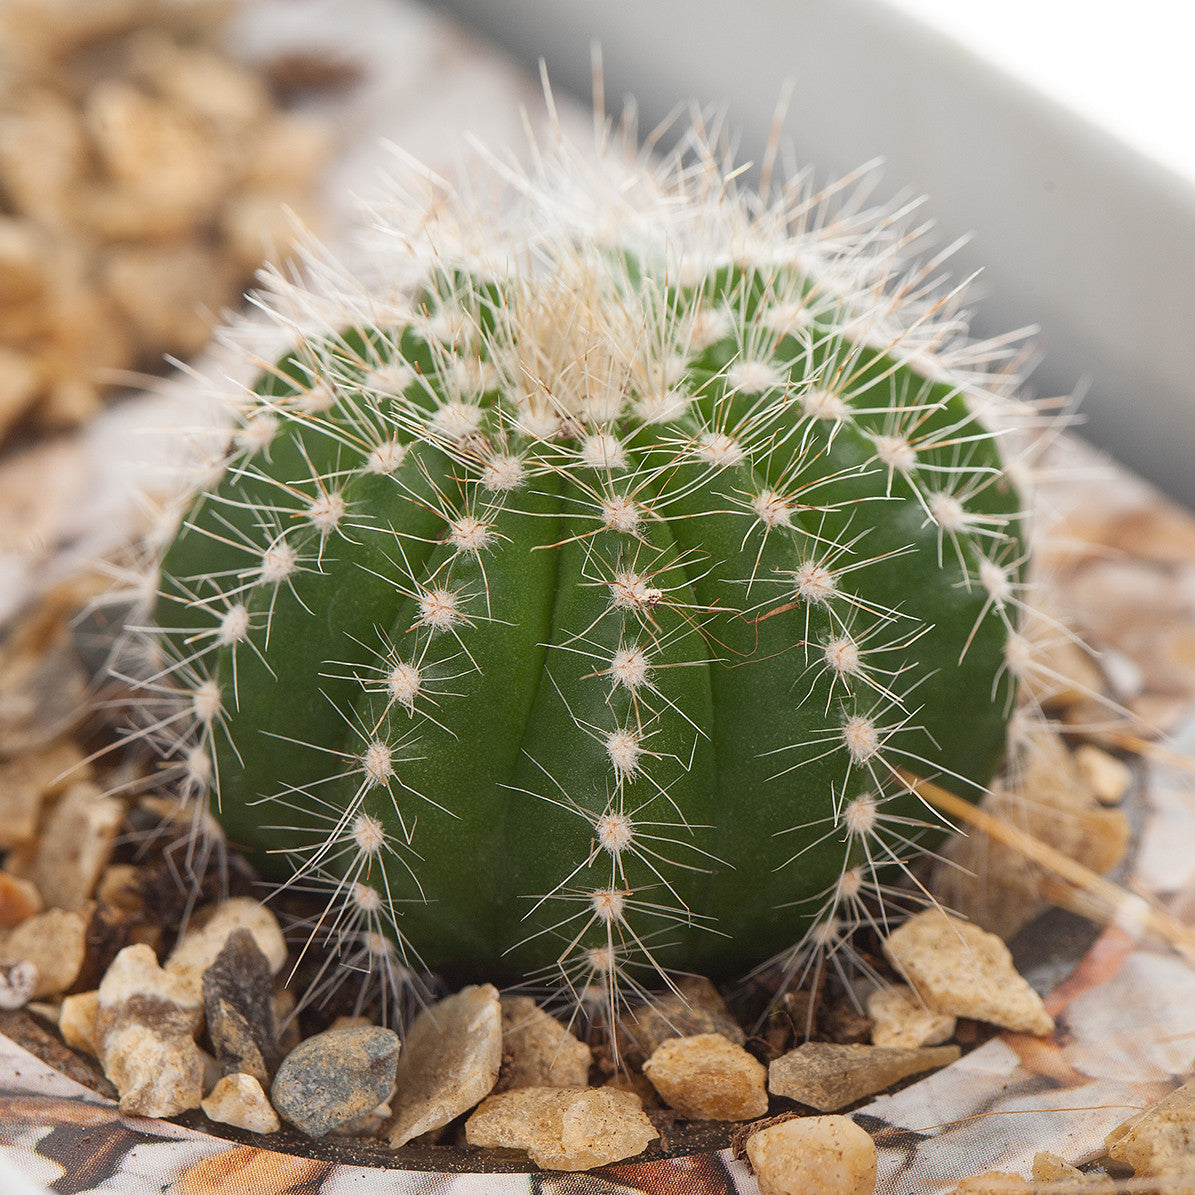 A small, round cactus